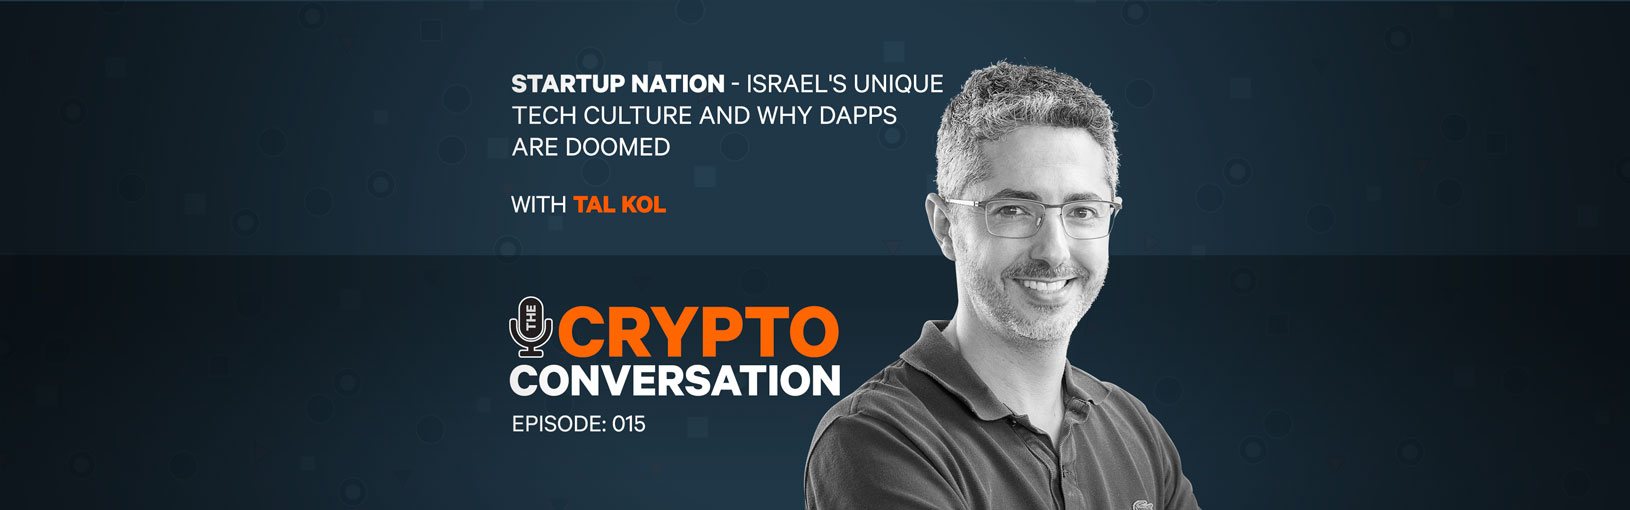 Startup Nation – Israel’s tech culture, Dapps are doomed, and can blockchain solve corruption?